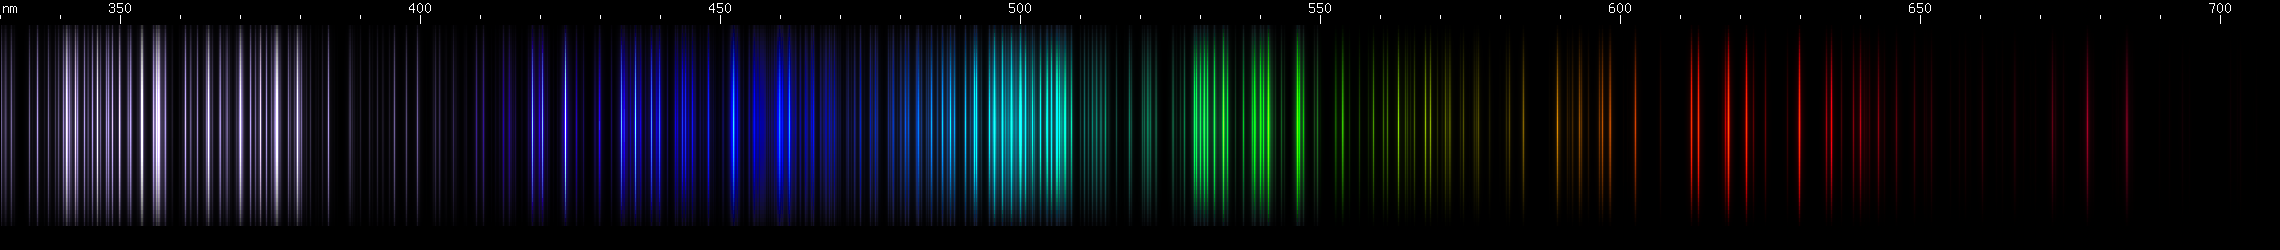 Spectral lines of Thulium.